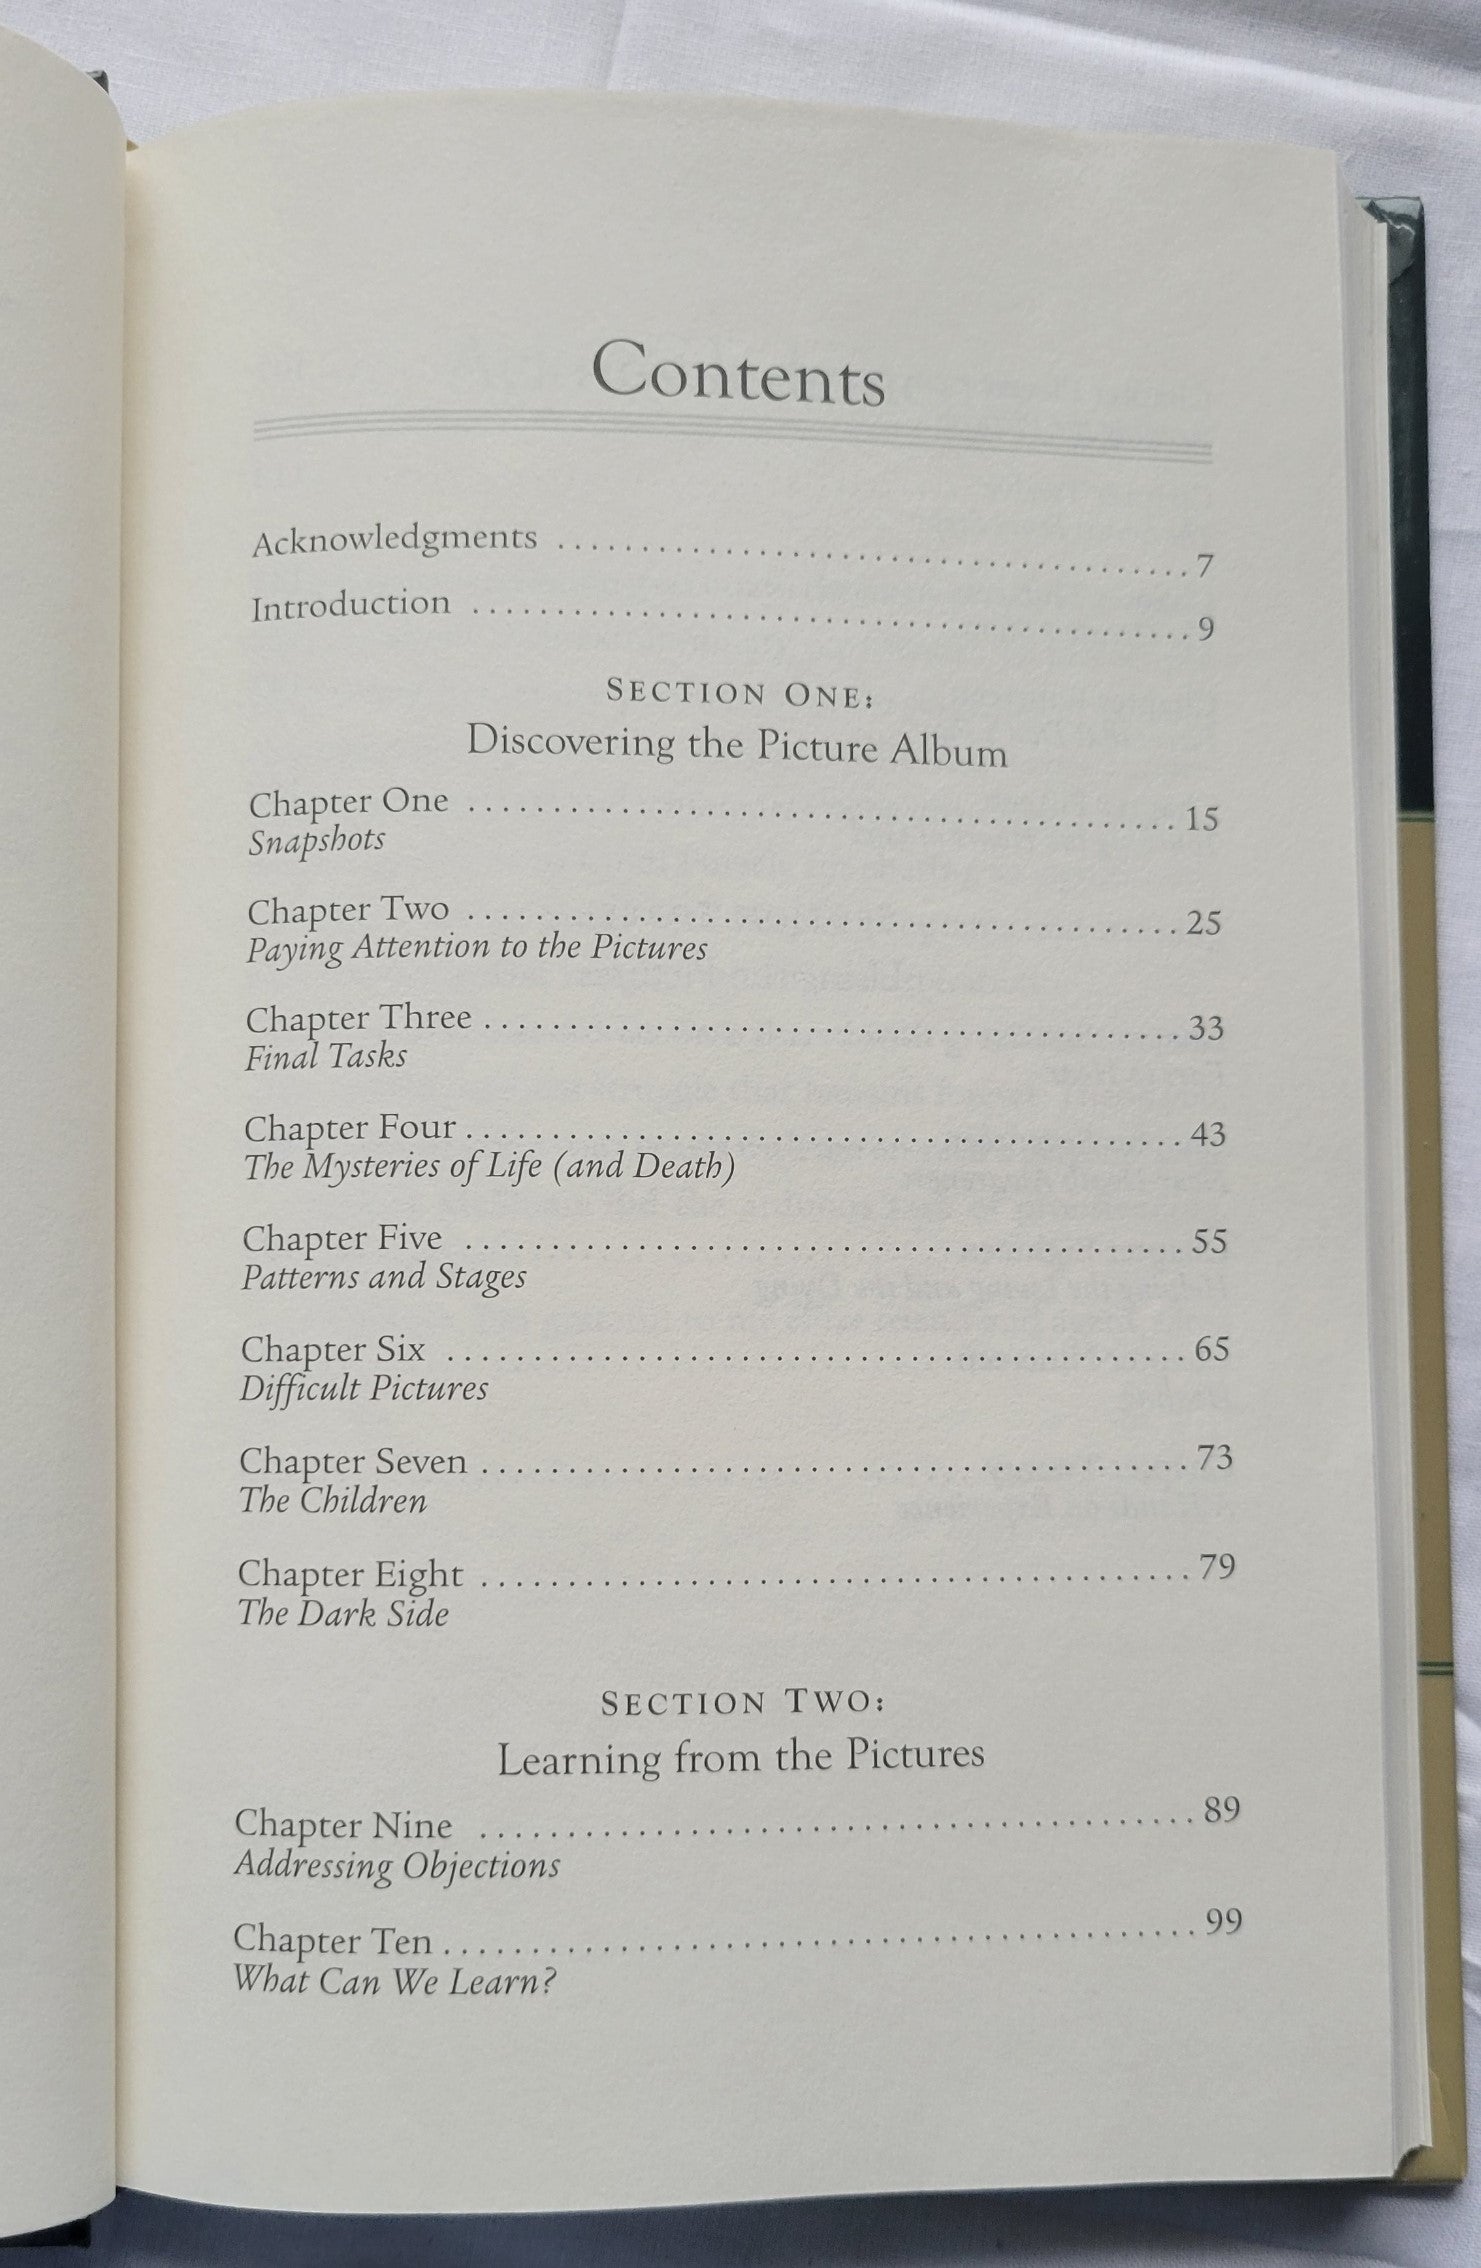 Used book "Crossing the Threshold of Eternity: What the Dying Can Teach the Living" by Dr. Robert L. Wise, published by Gospel Light, 2007. View of table of contents.